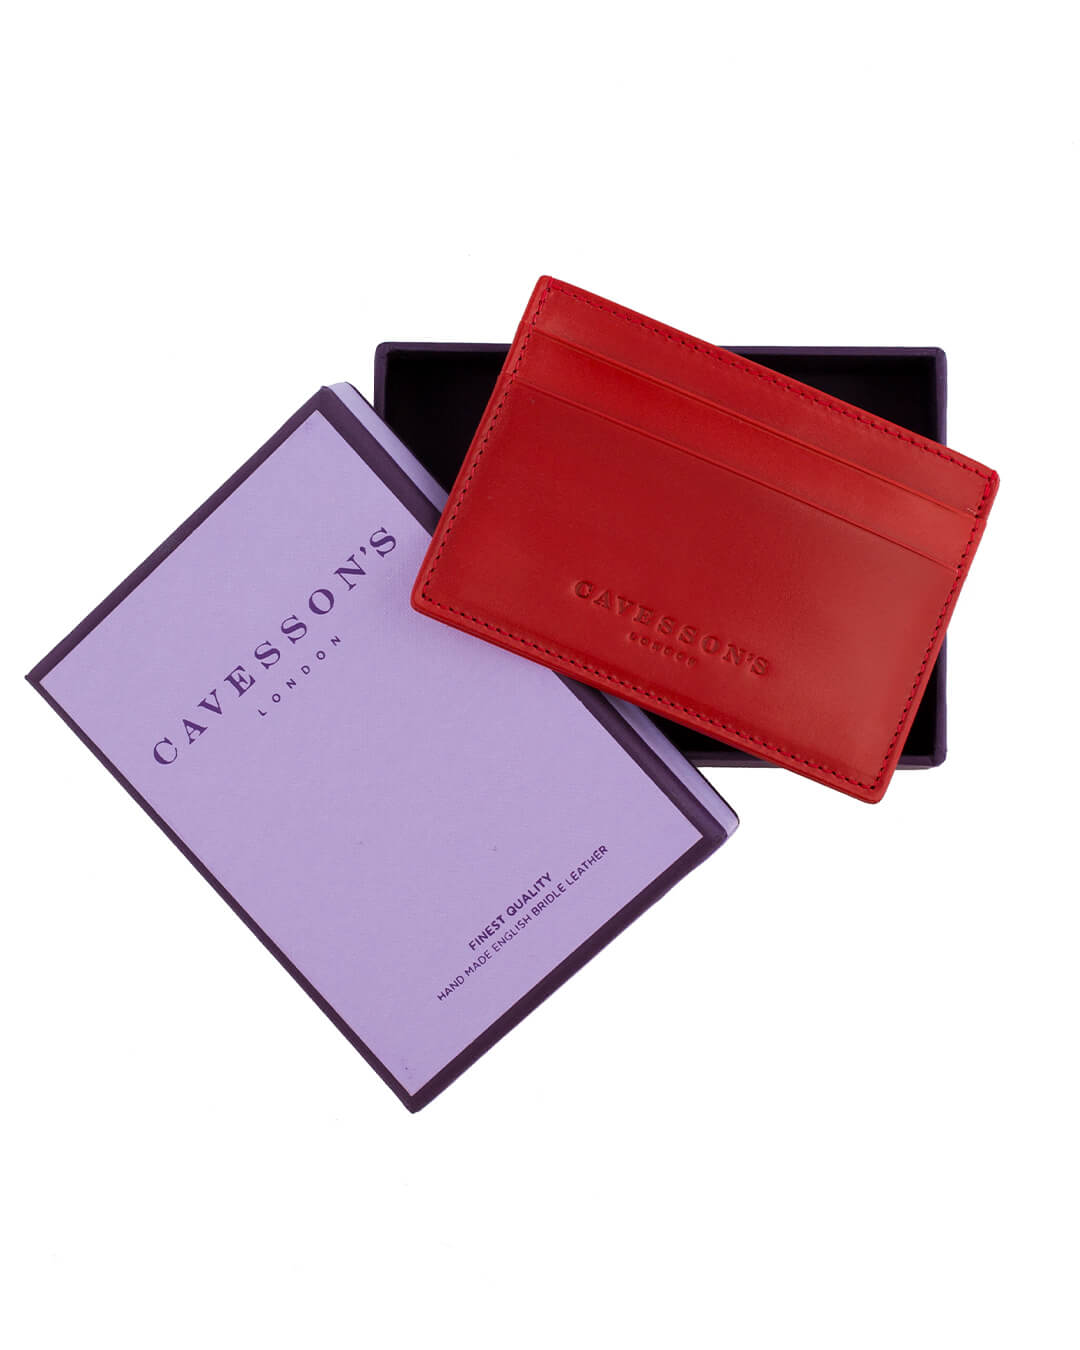 Cavesson's Wallets Cavesson's Red Card Case